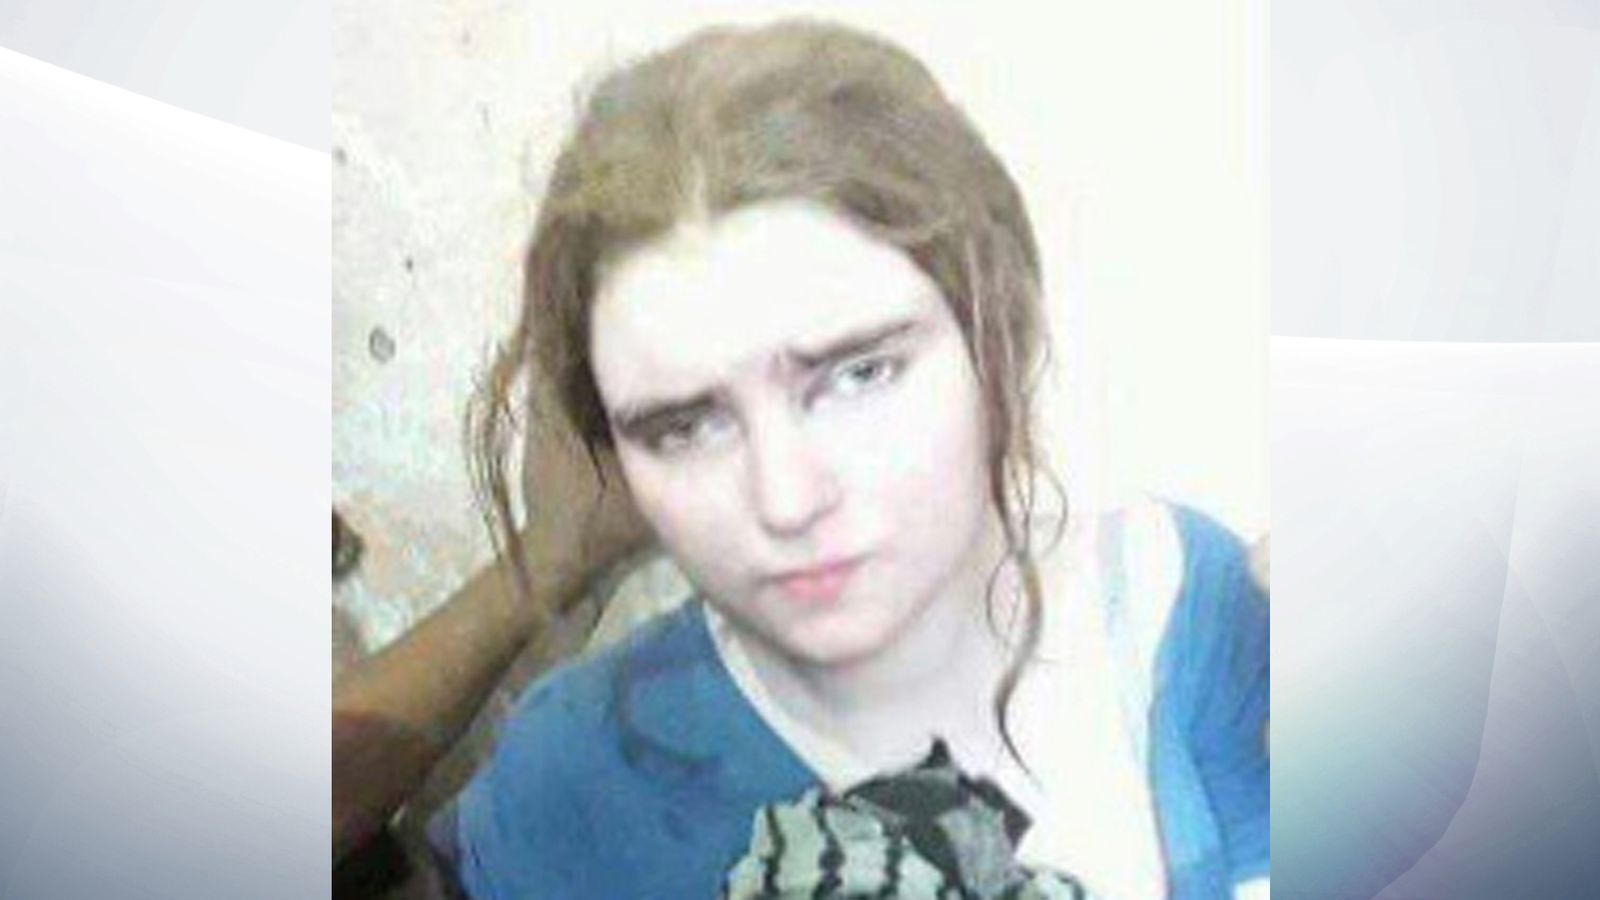 German Girl 16 Reportedly Arrested In Mosul For Supporting Is World